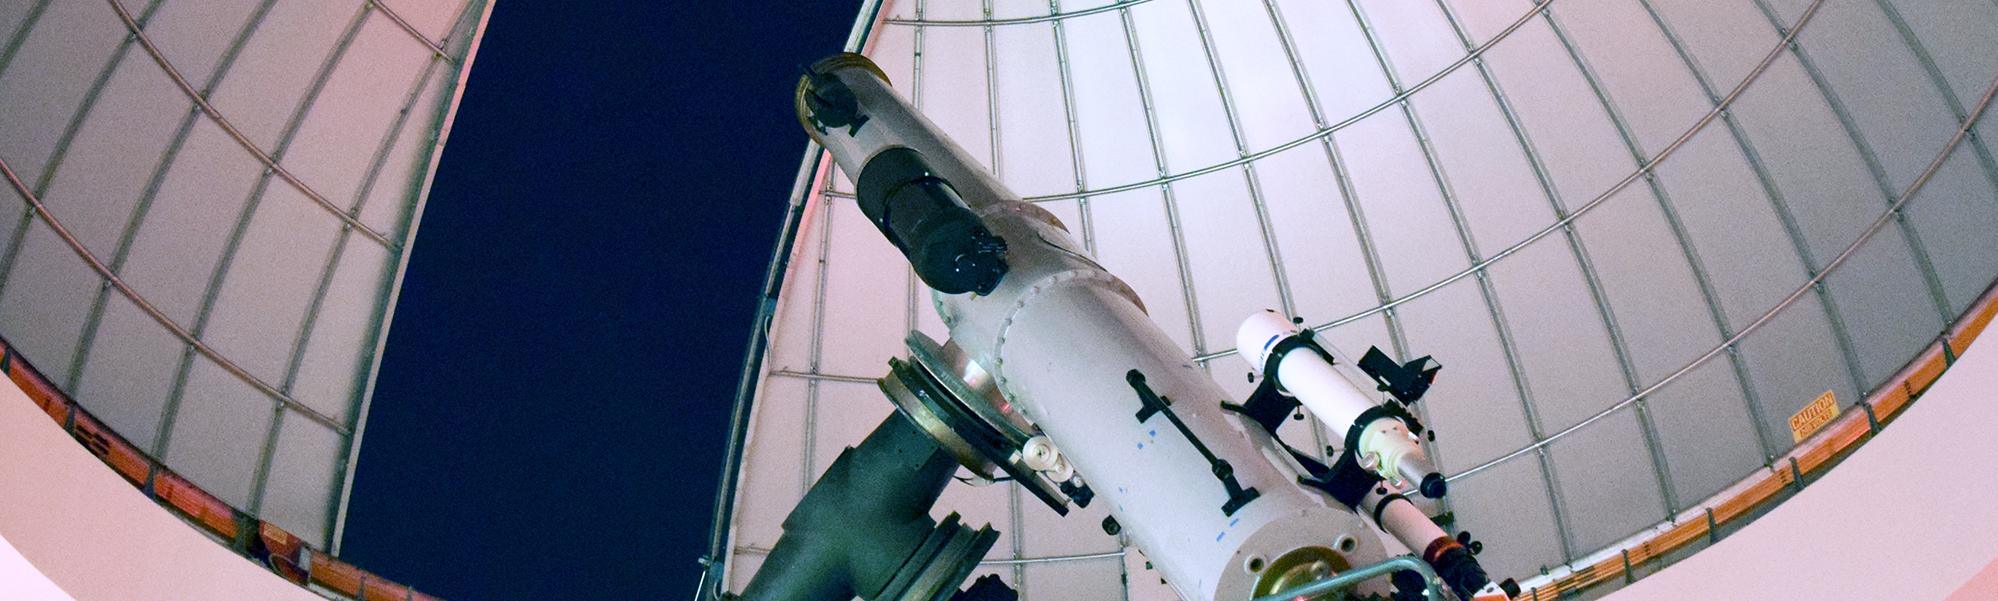 Large white telescope points towards the dark night sky under a partially open observatory 